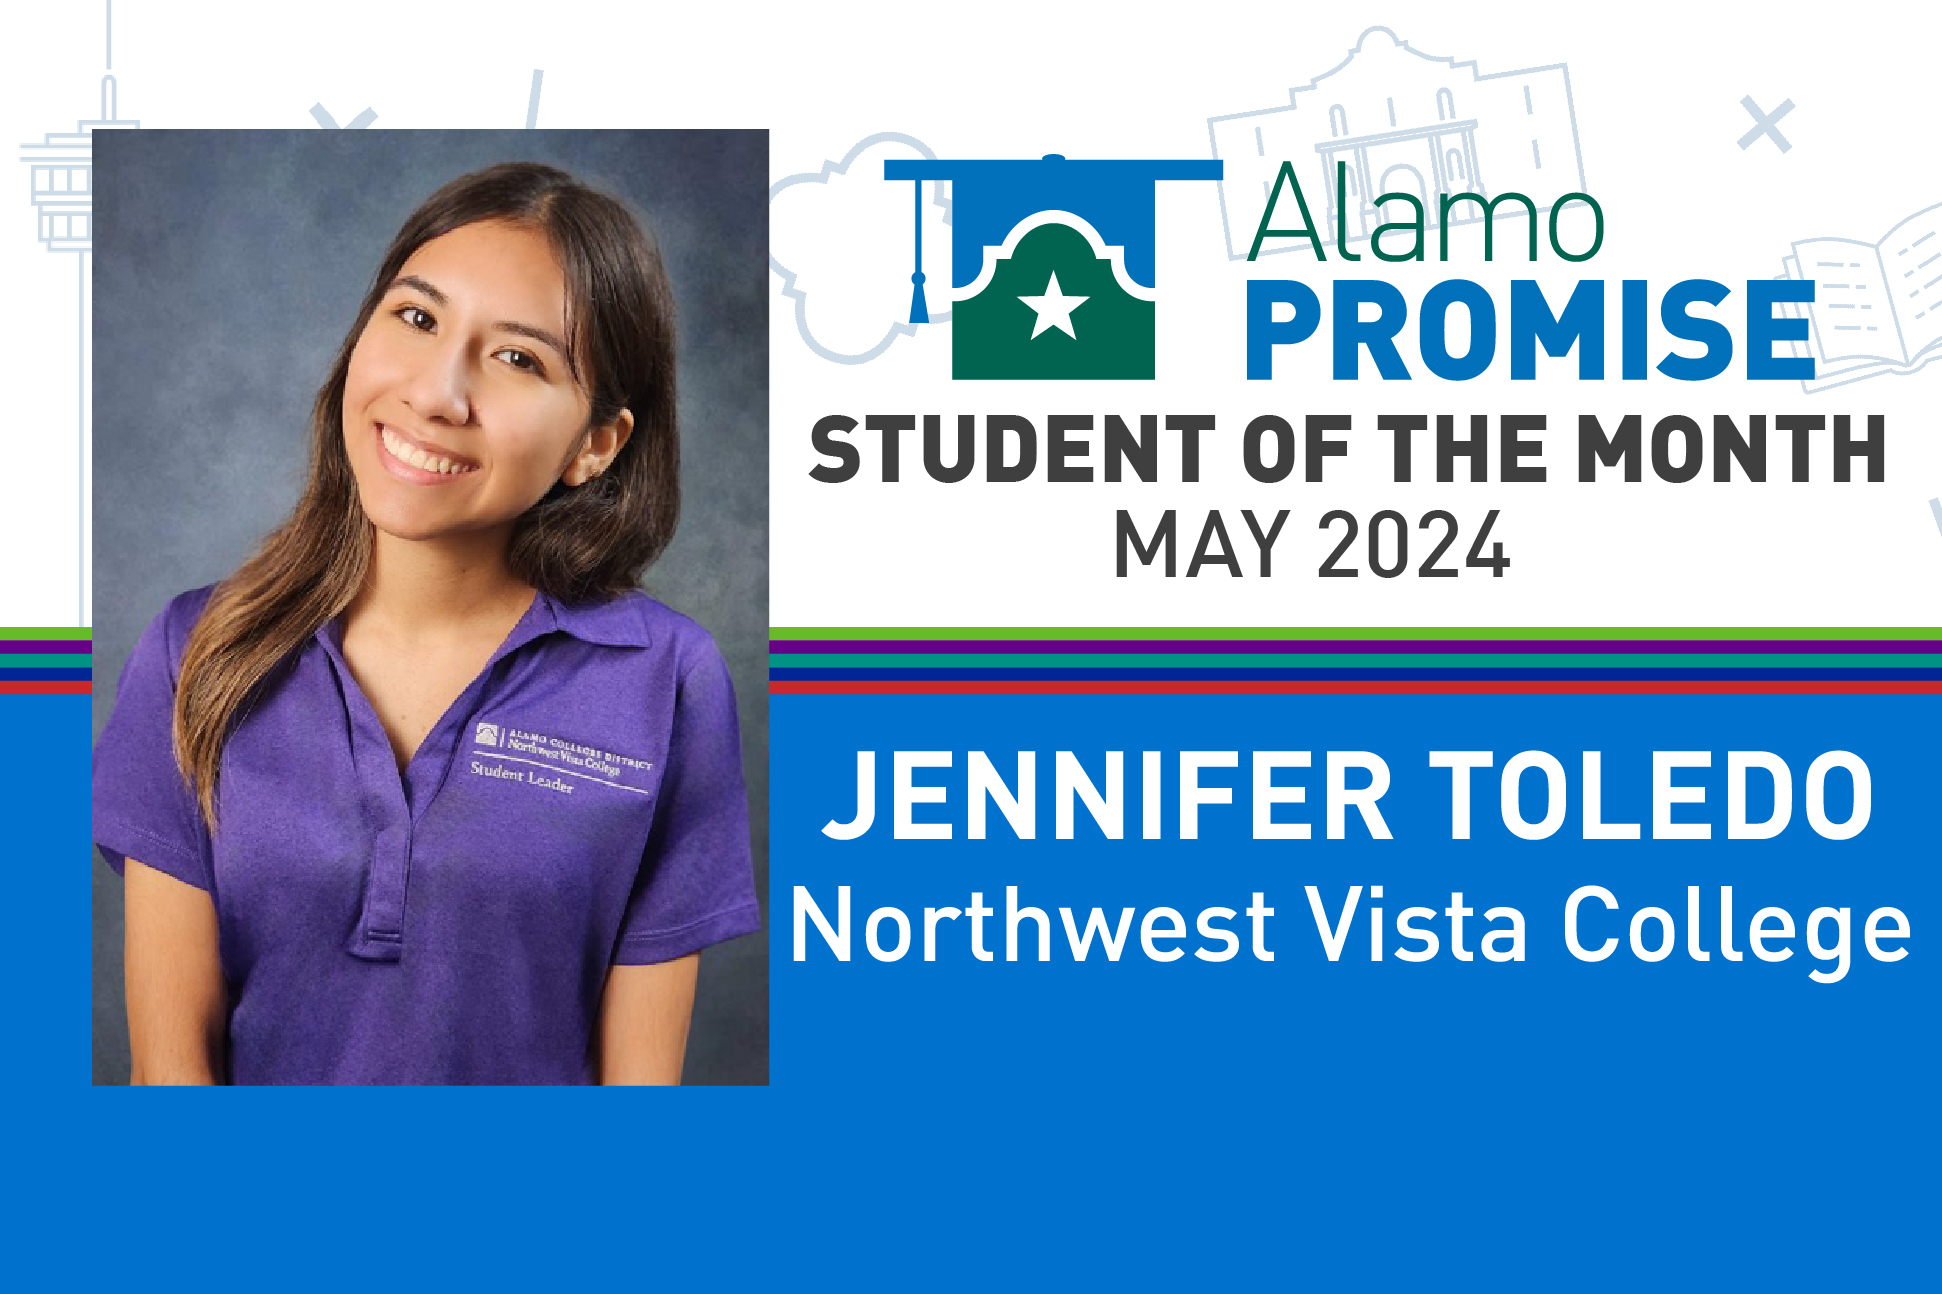 AlamoPROMISE Student of the Month - April-932x621.png